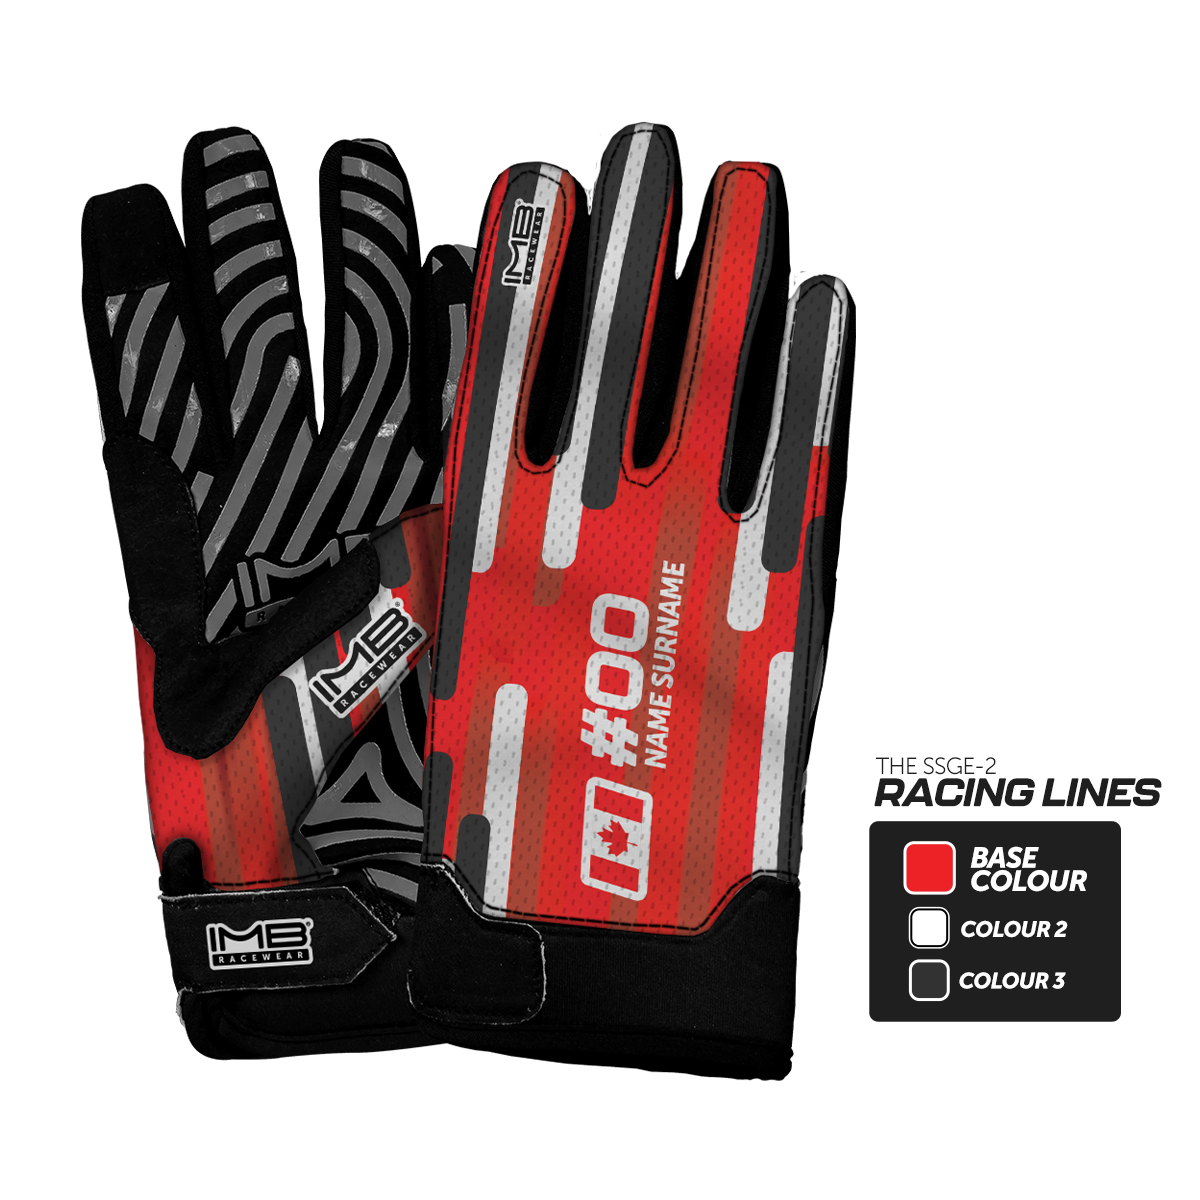 The Racing Lines SSGE-2 Short Sim Racing Gloves